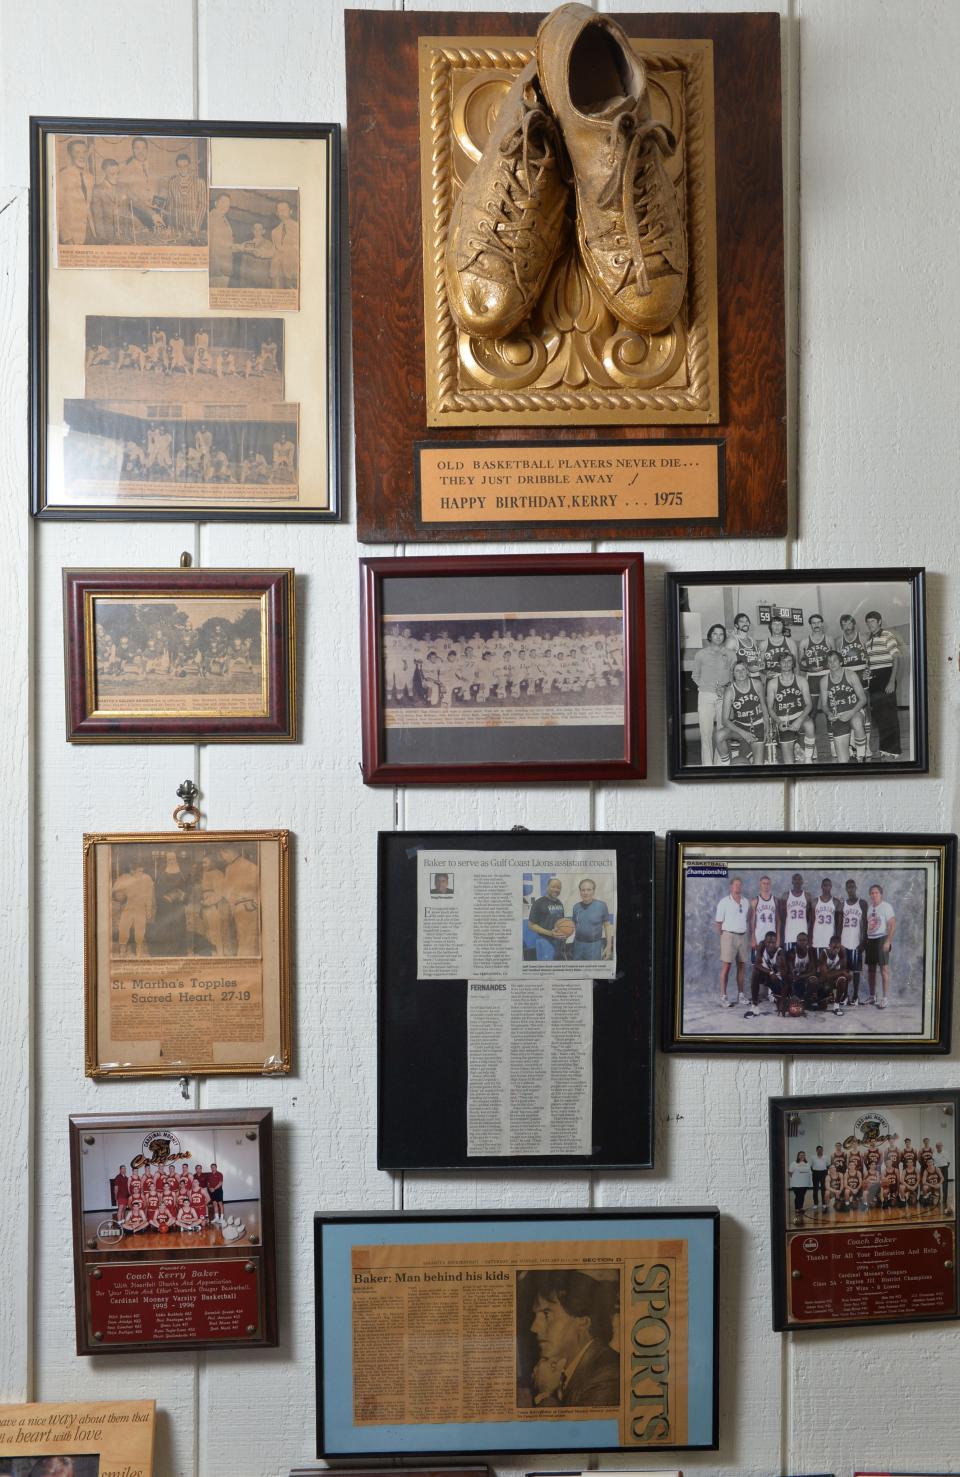 Framed newspaper articles, team photos and plaques decorate a corner of a room, filled with Sarasota sports memorabilia at long-time basketball coach Kerry Baker's home in Sarasota. At the top left, is a photo of Kerry Baker's 8th grade basketball team at St. Martha's. On the right is a team photo of the Sarasota Oyster Bar semi-pro basketball team.